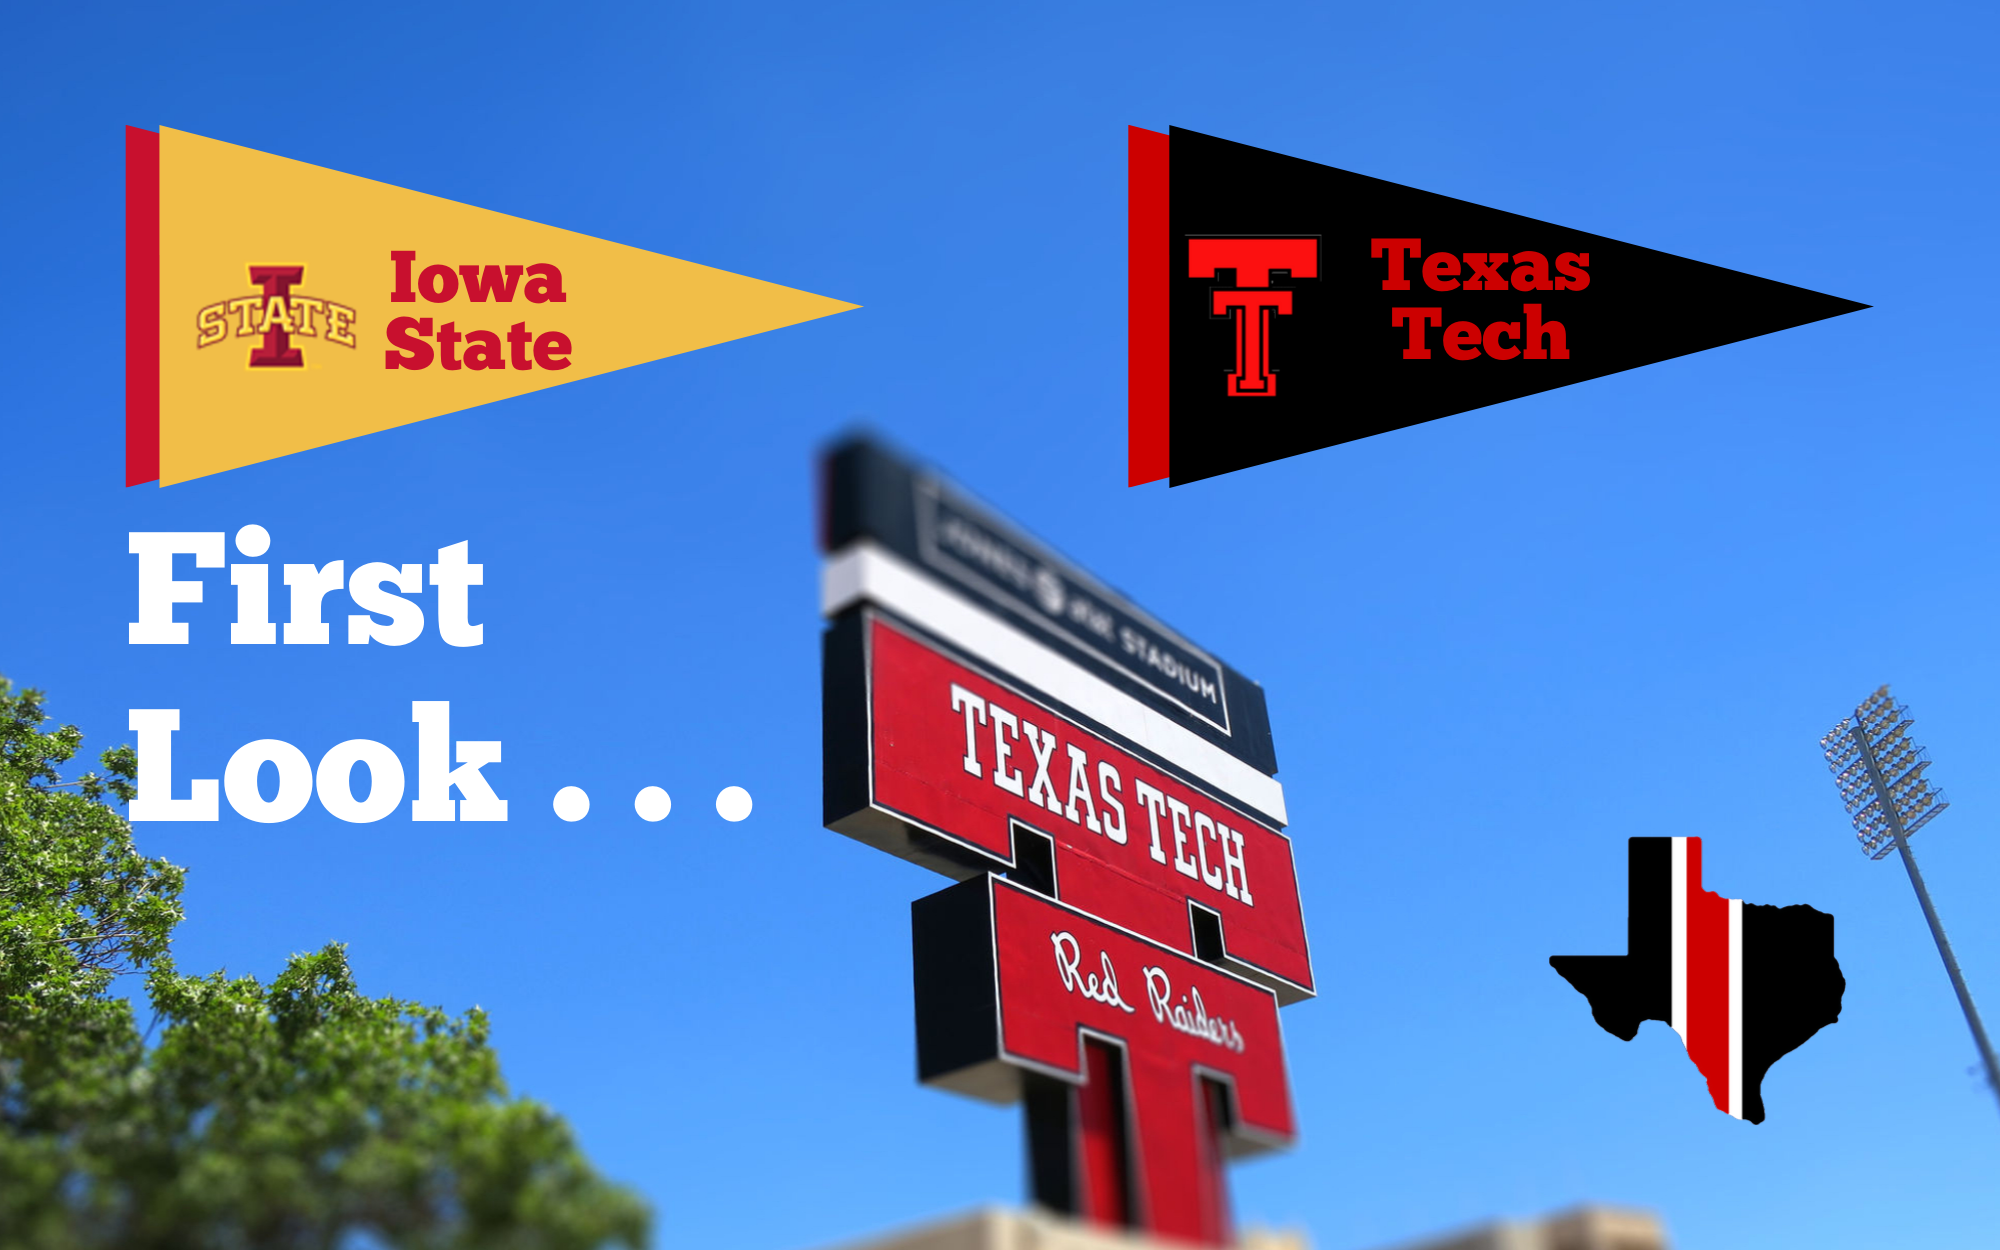 First Look . . . Iowa State Cyclones vs. Texas Tech Red Raiders